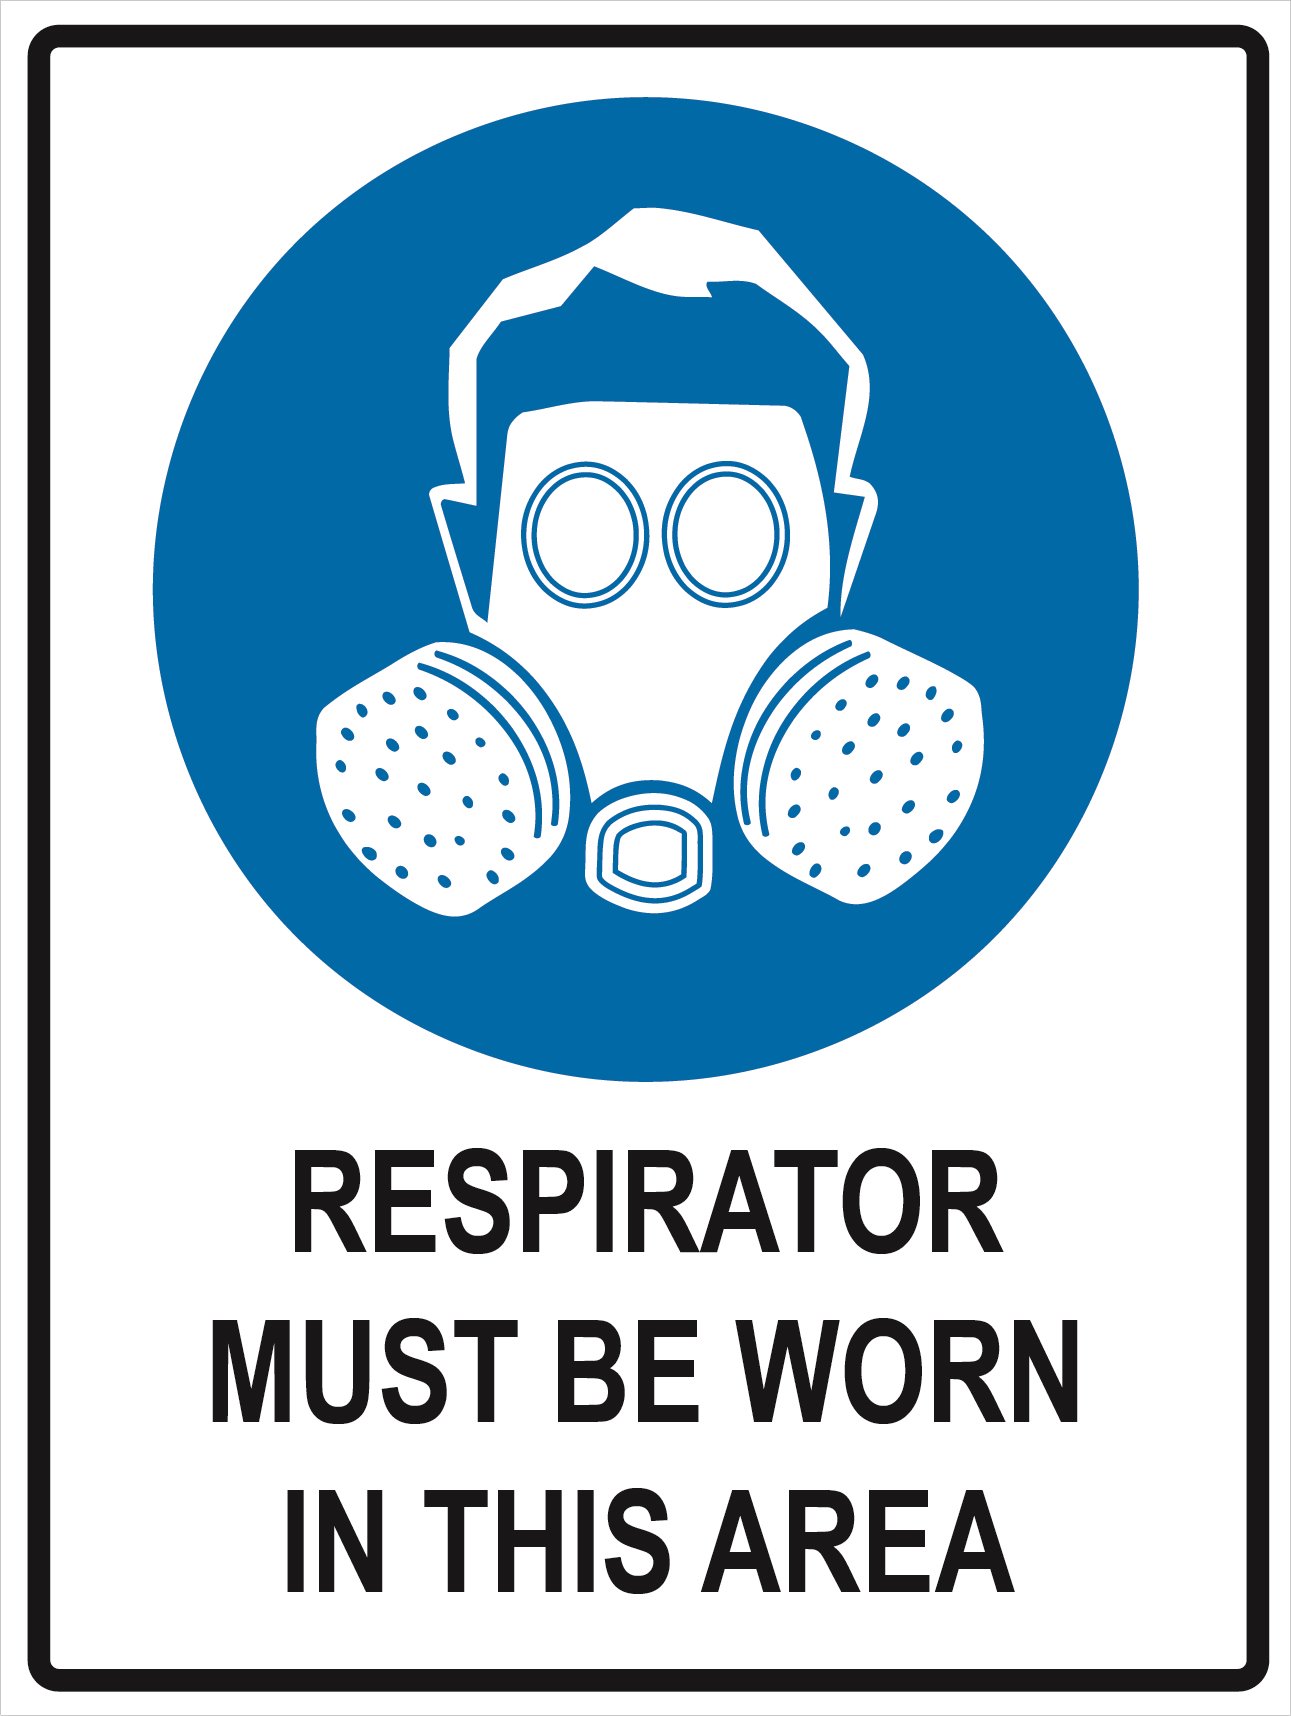 Respirator Must Be Worn in this Area